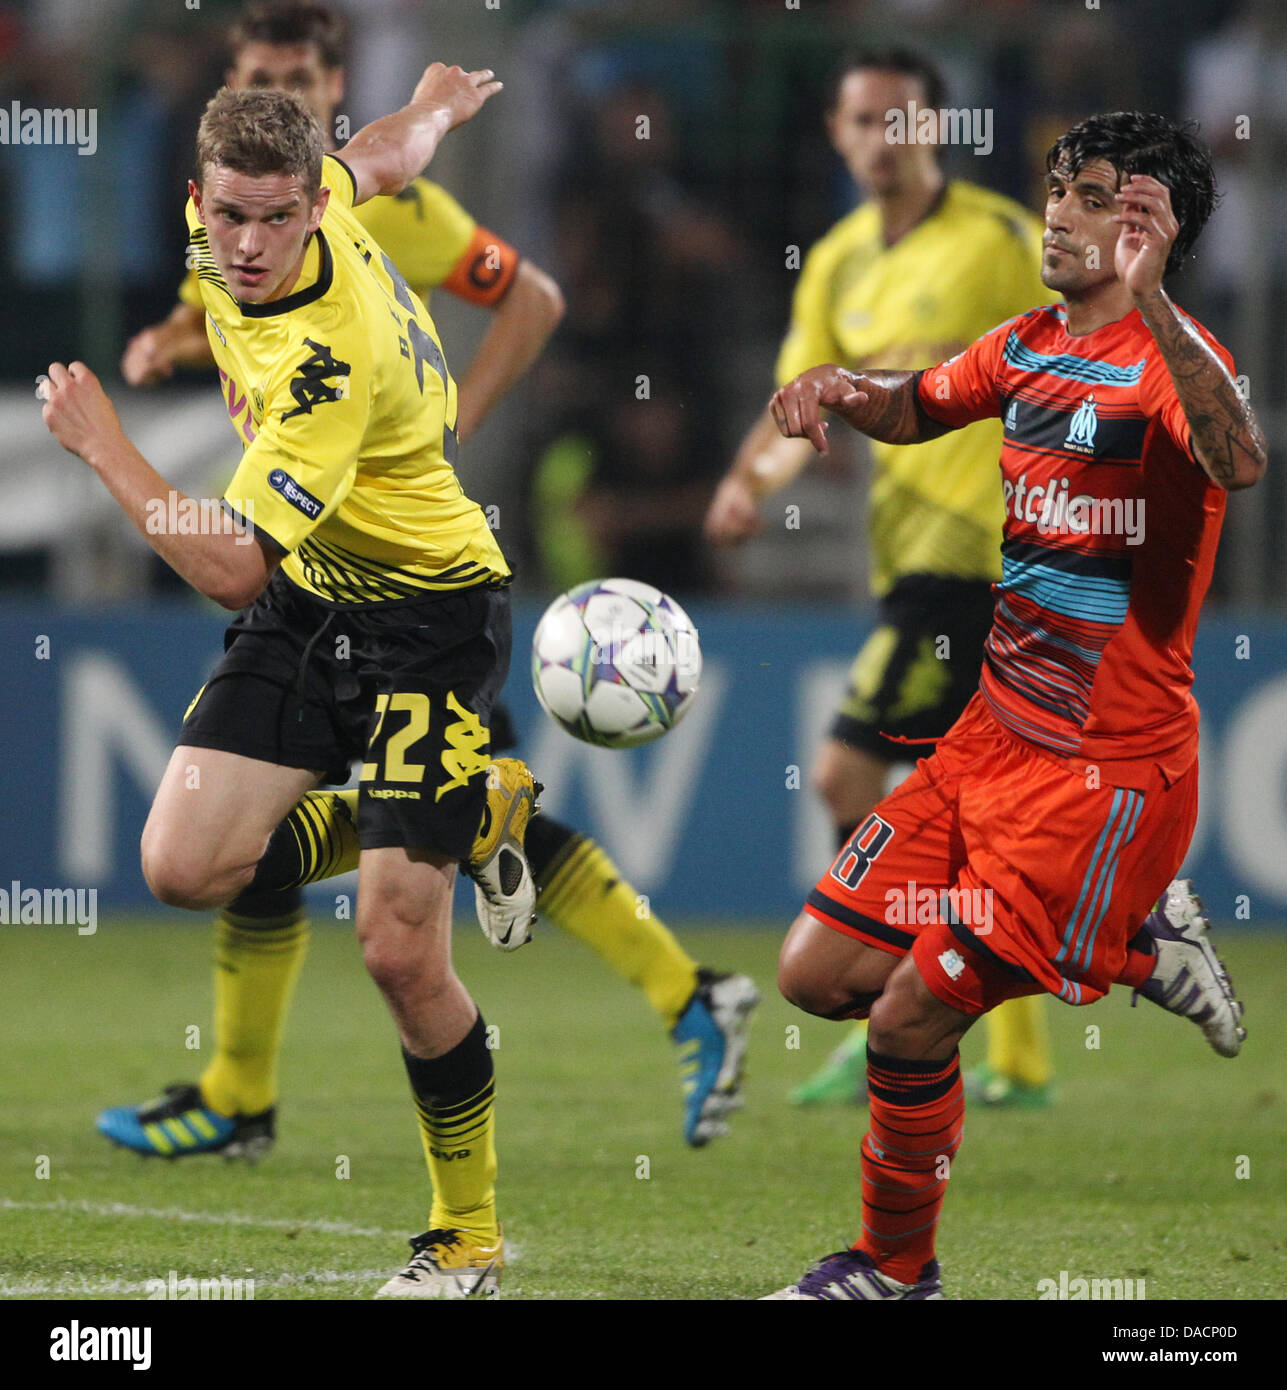 Dortmund's Sven Bender (l) and Marseille's Lucho González (r) fight for the ball during the Champions League group F soccer match between Olympique Marseille and Borussia Dortmund at the Stade Vélodrome in Marseille, France, 28 September 2011. Photo: Friso Gentsch dpa  +++(c) dpa - Bildfunk+++ Stock Photo